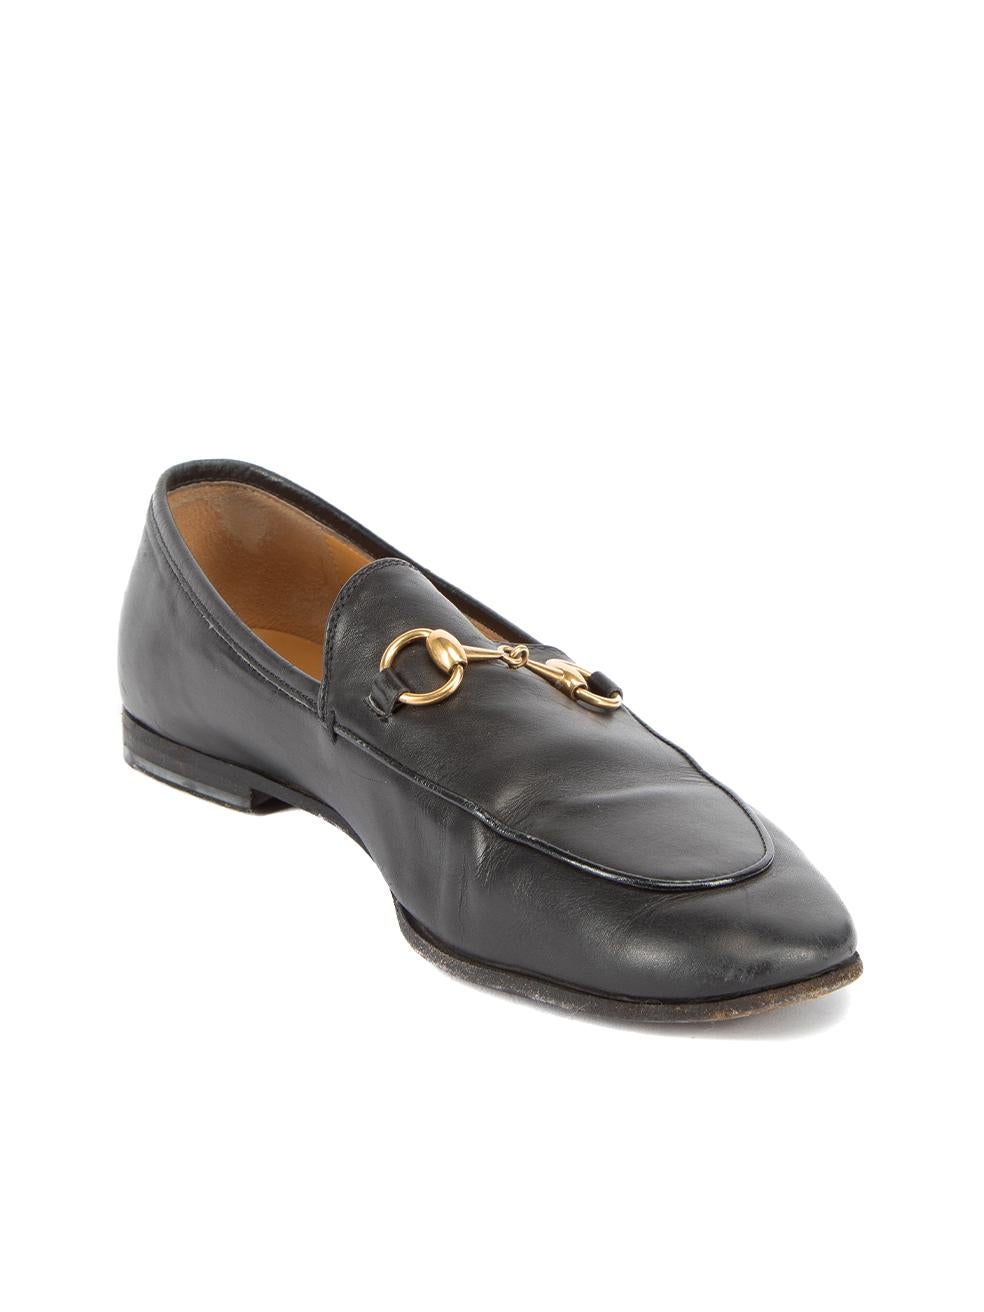 CONDITION is Very good. Minimal wear to loafers is evident. Scuffs and peeling to the exterior leather material on the right loafer can be seen on this used Gucci designer resale item. This item comes with original dustbags and shoebox. Details